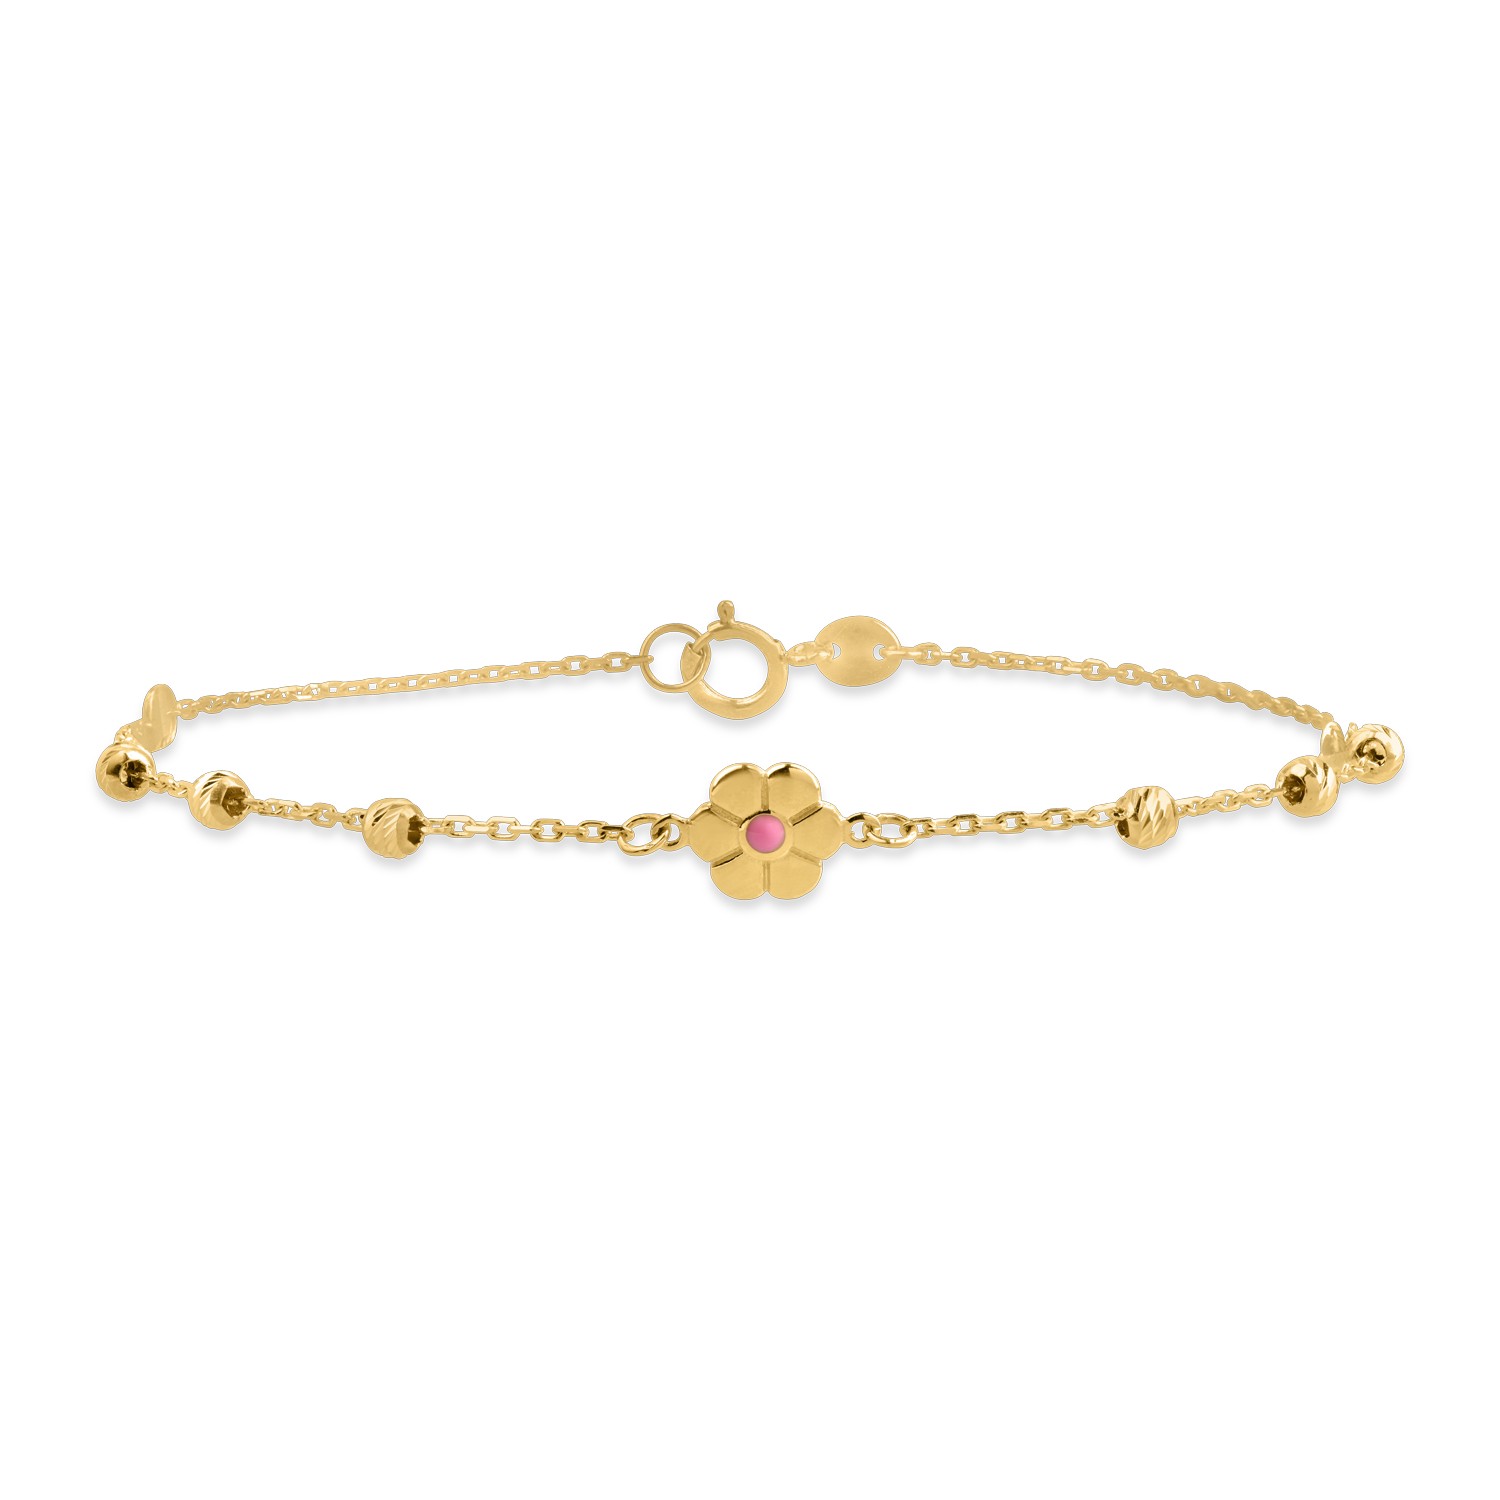 Yellow gold bracelet with beads and flower pendant